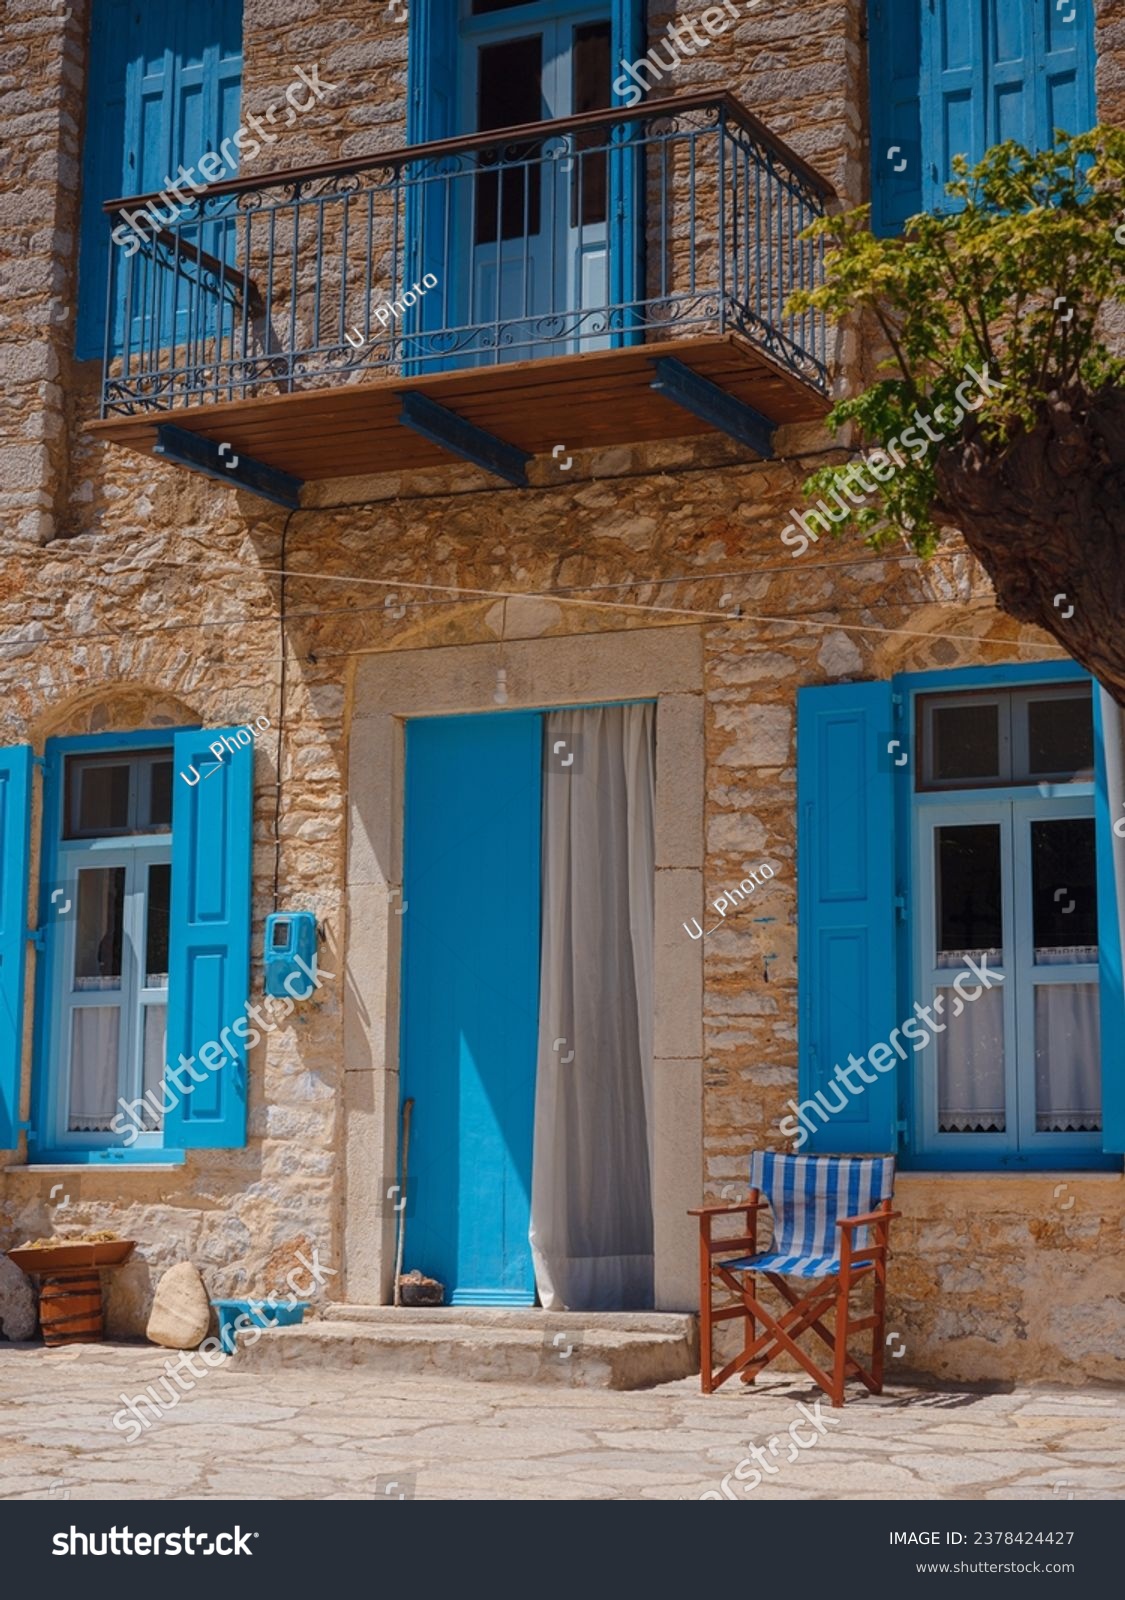 Cute details of windows, doors, balconies from old house in Simi island . Greece islands holidays from Rhodos in Aegean Sea. Colorful neoclassical houses in bay of Symi. Holiday travel background. #2378424427